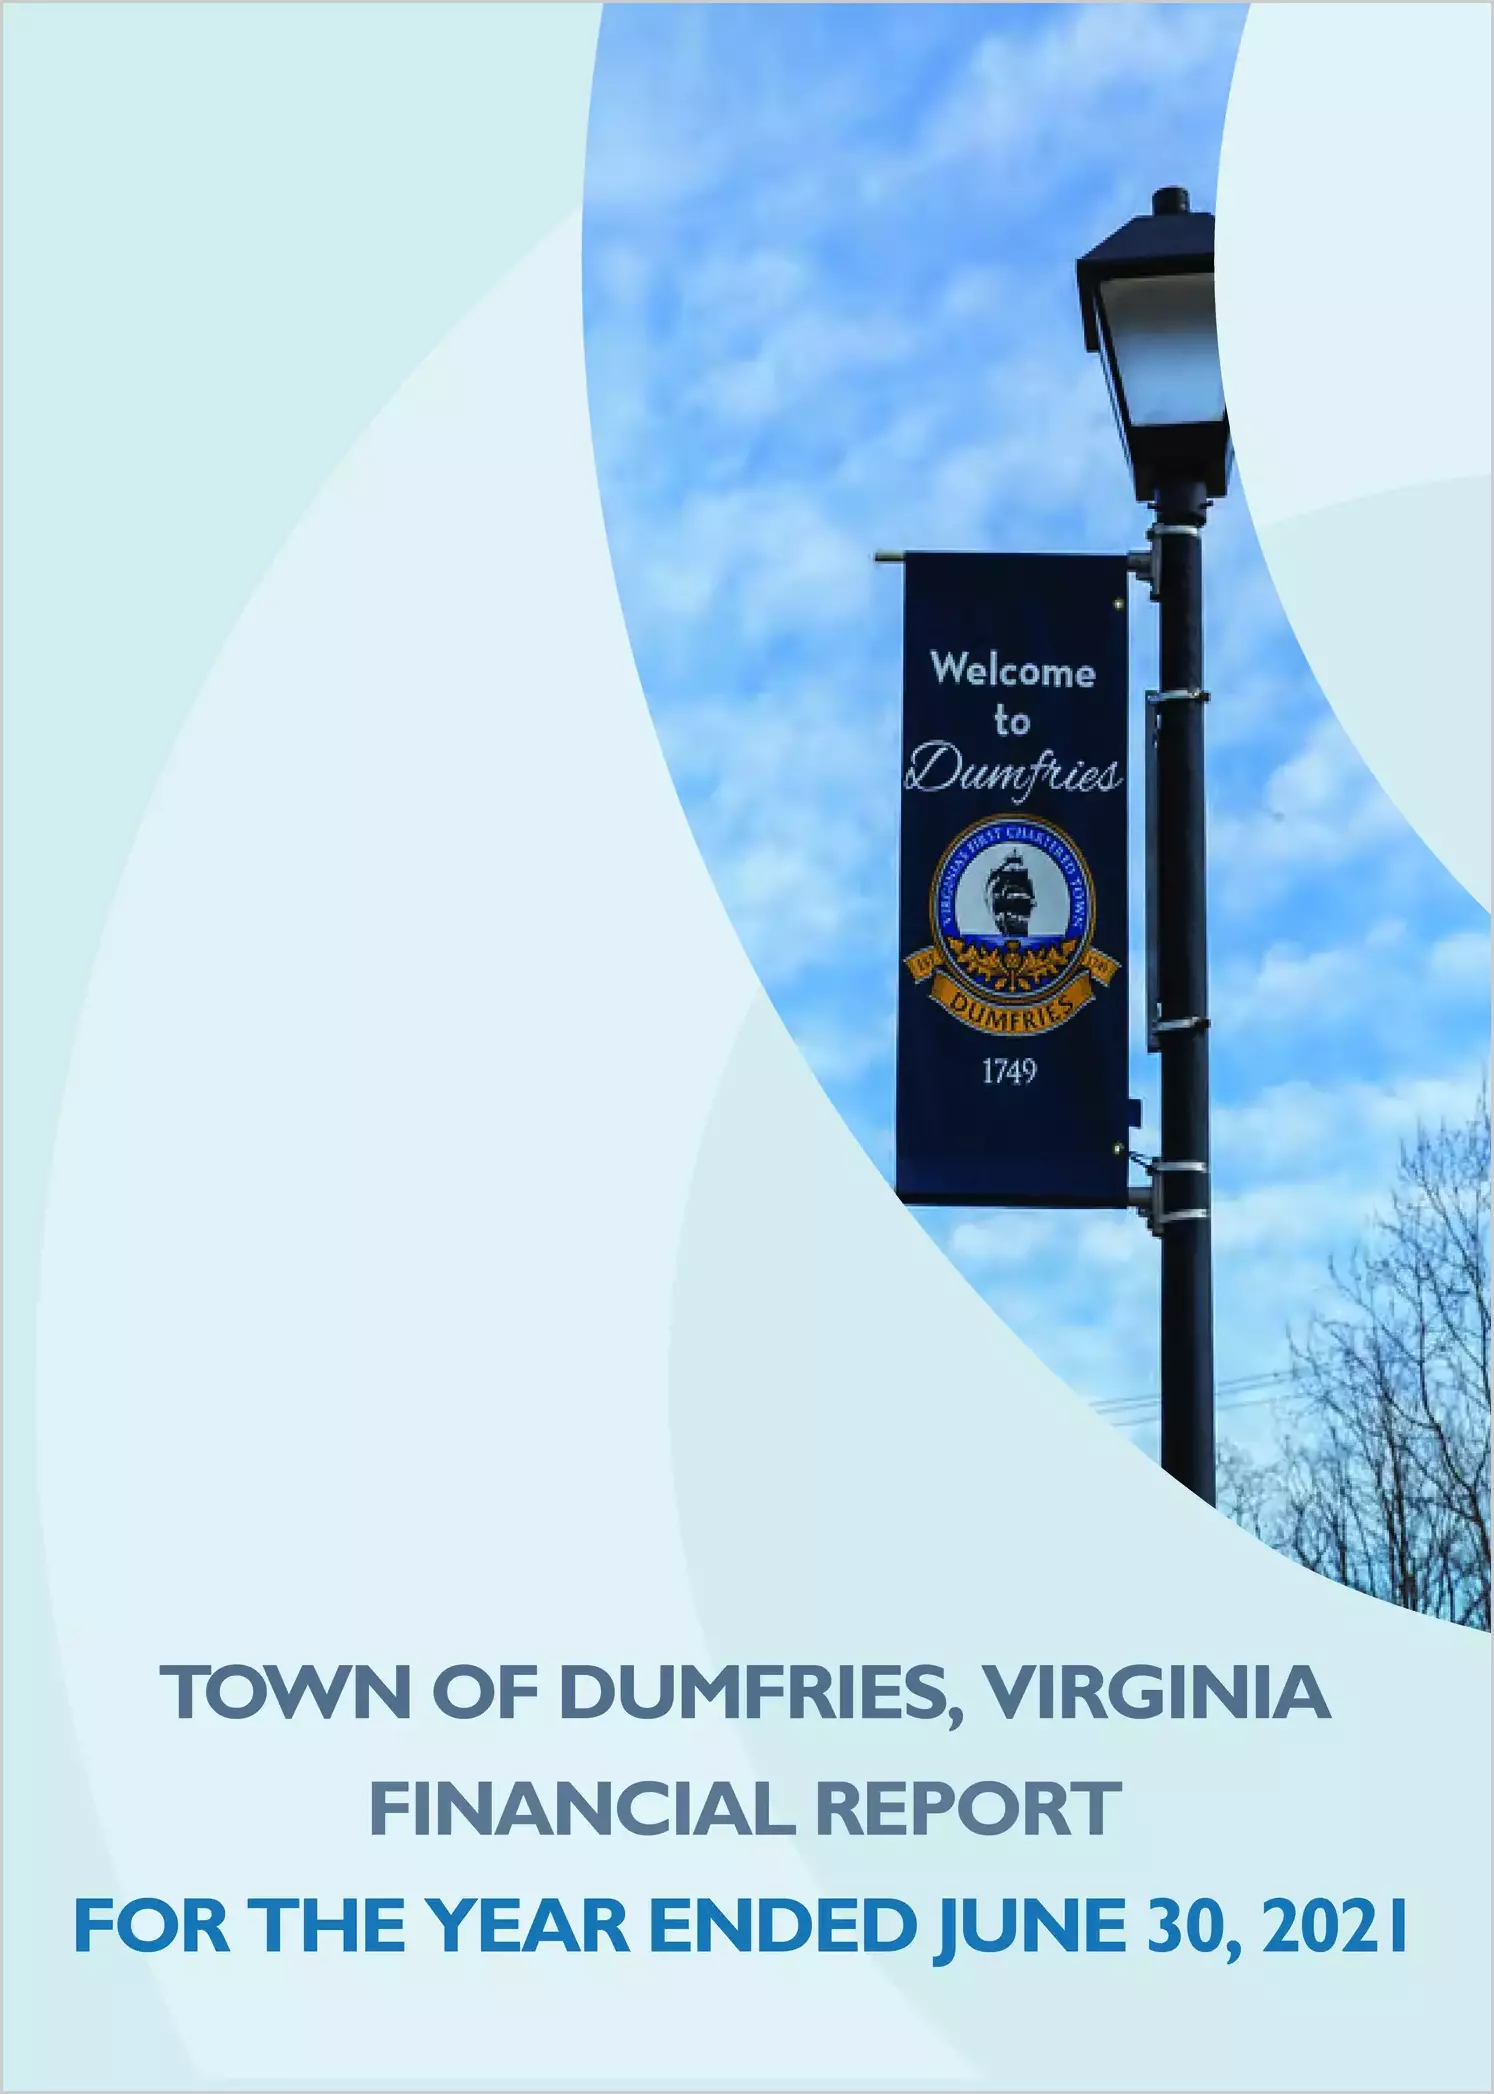 2021 Annual Financial Report for Town of Dumfries